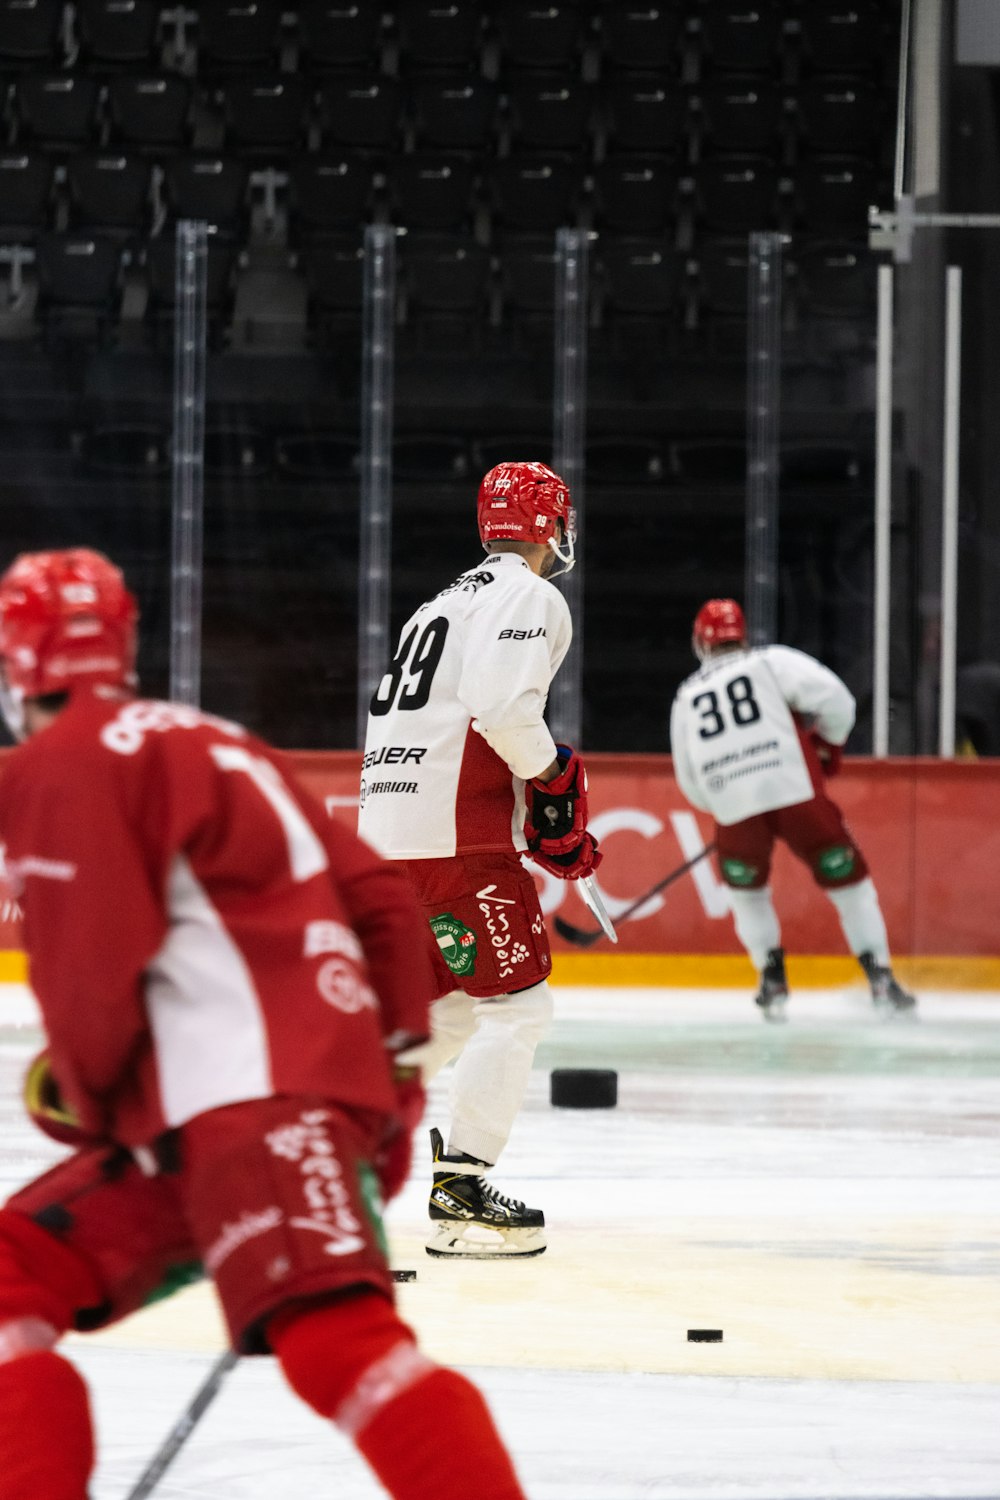 a group of people playing a game of ice hockey